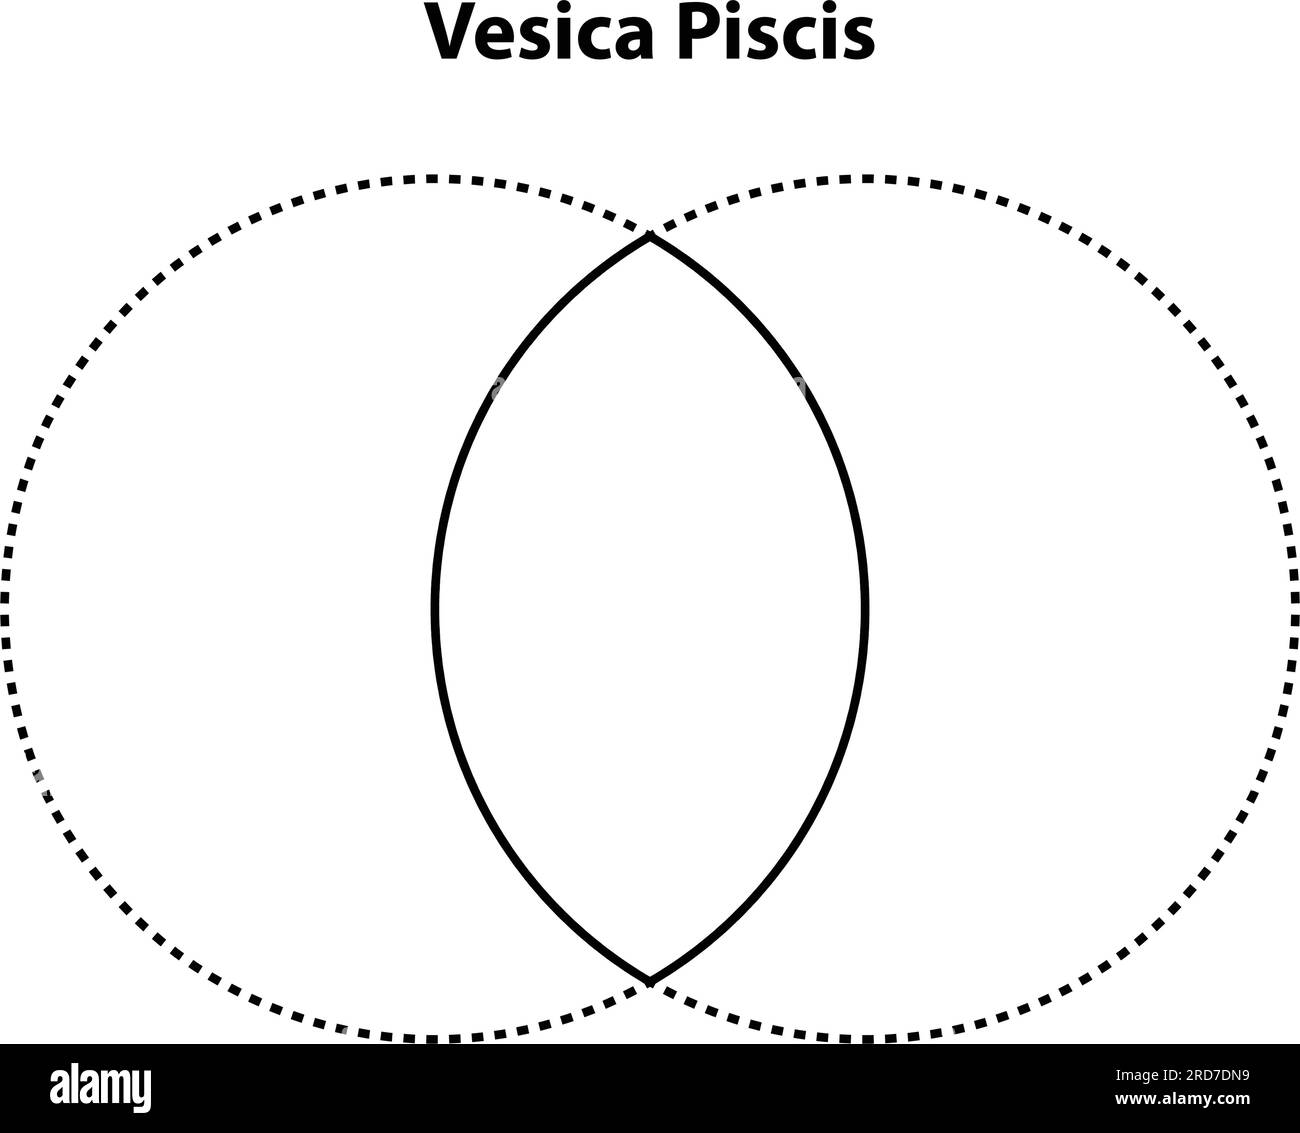 Visica piscis. Sacred Geometry Vector Design Elements. This religion, philosophy, and spirituality symbols. the world of geometry. Stock Vector